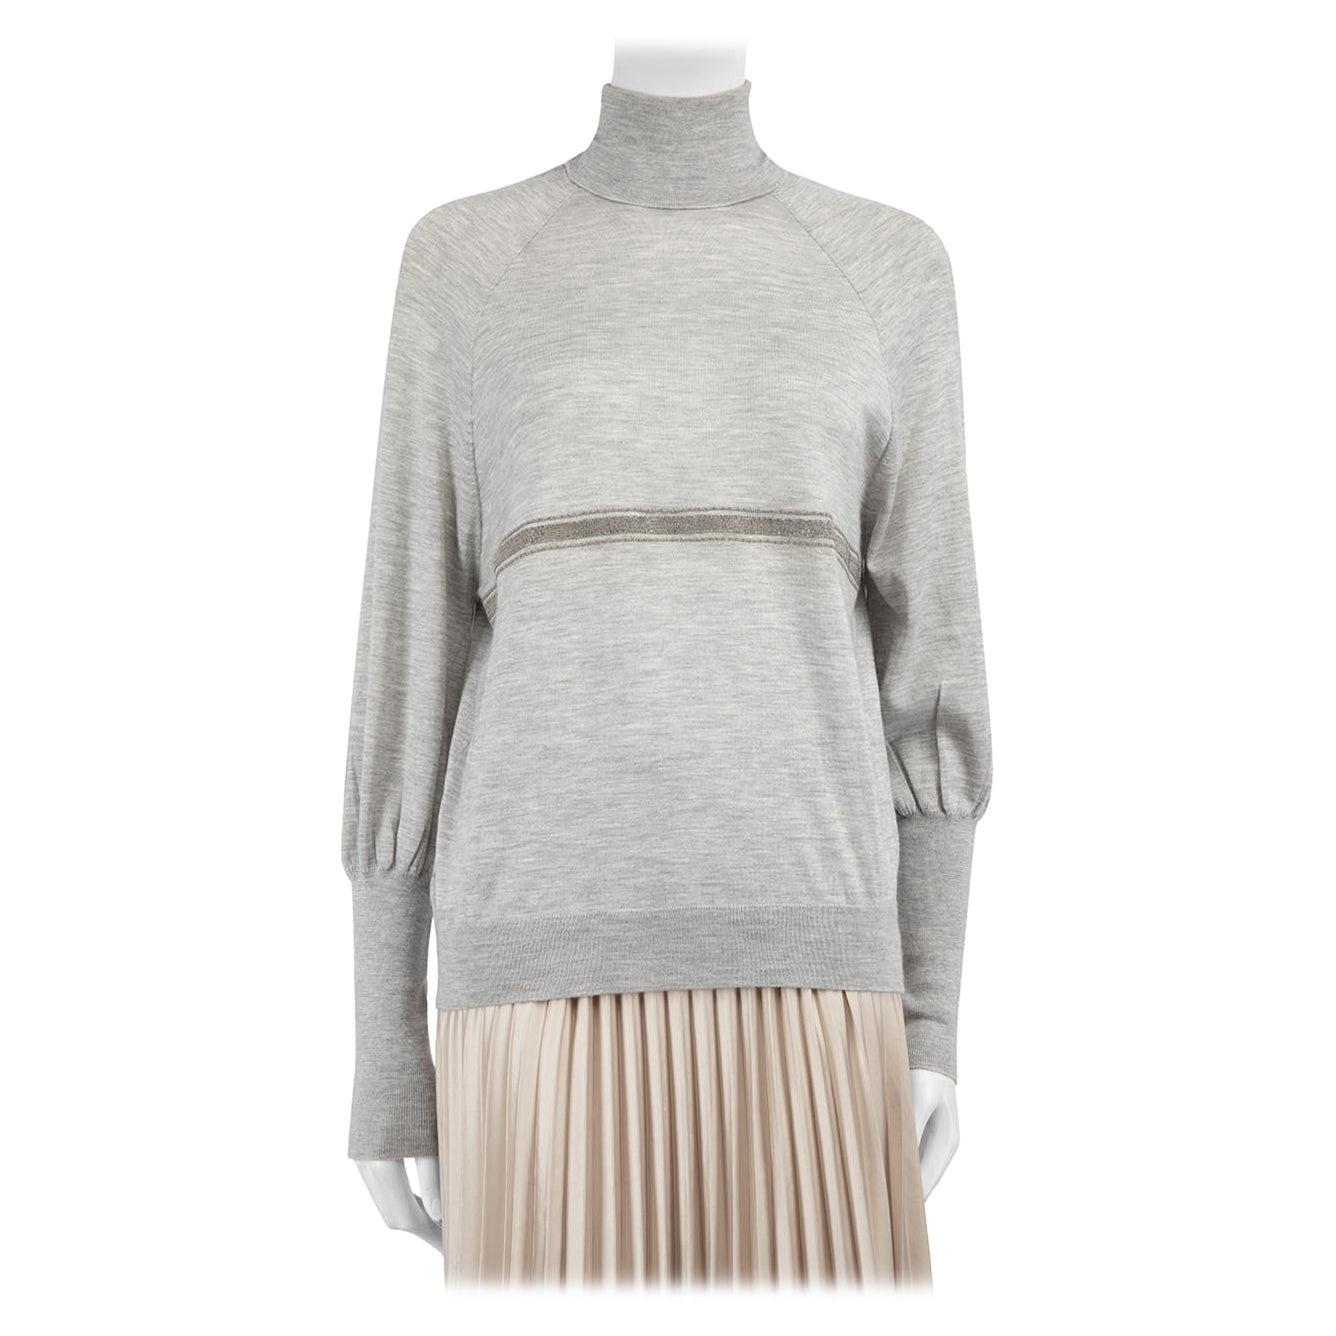 Brunello Cucinelli Grey Cashmere Beaded Turtleneck Top Size S For Sale